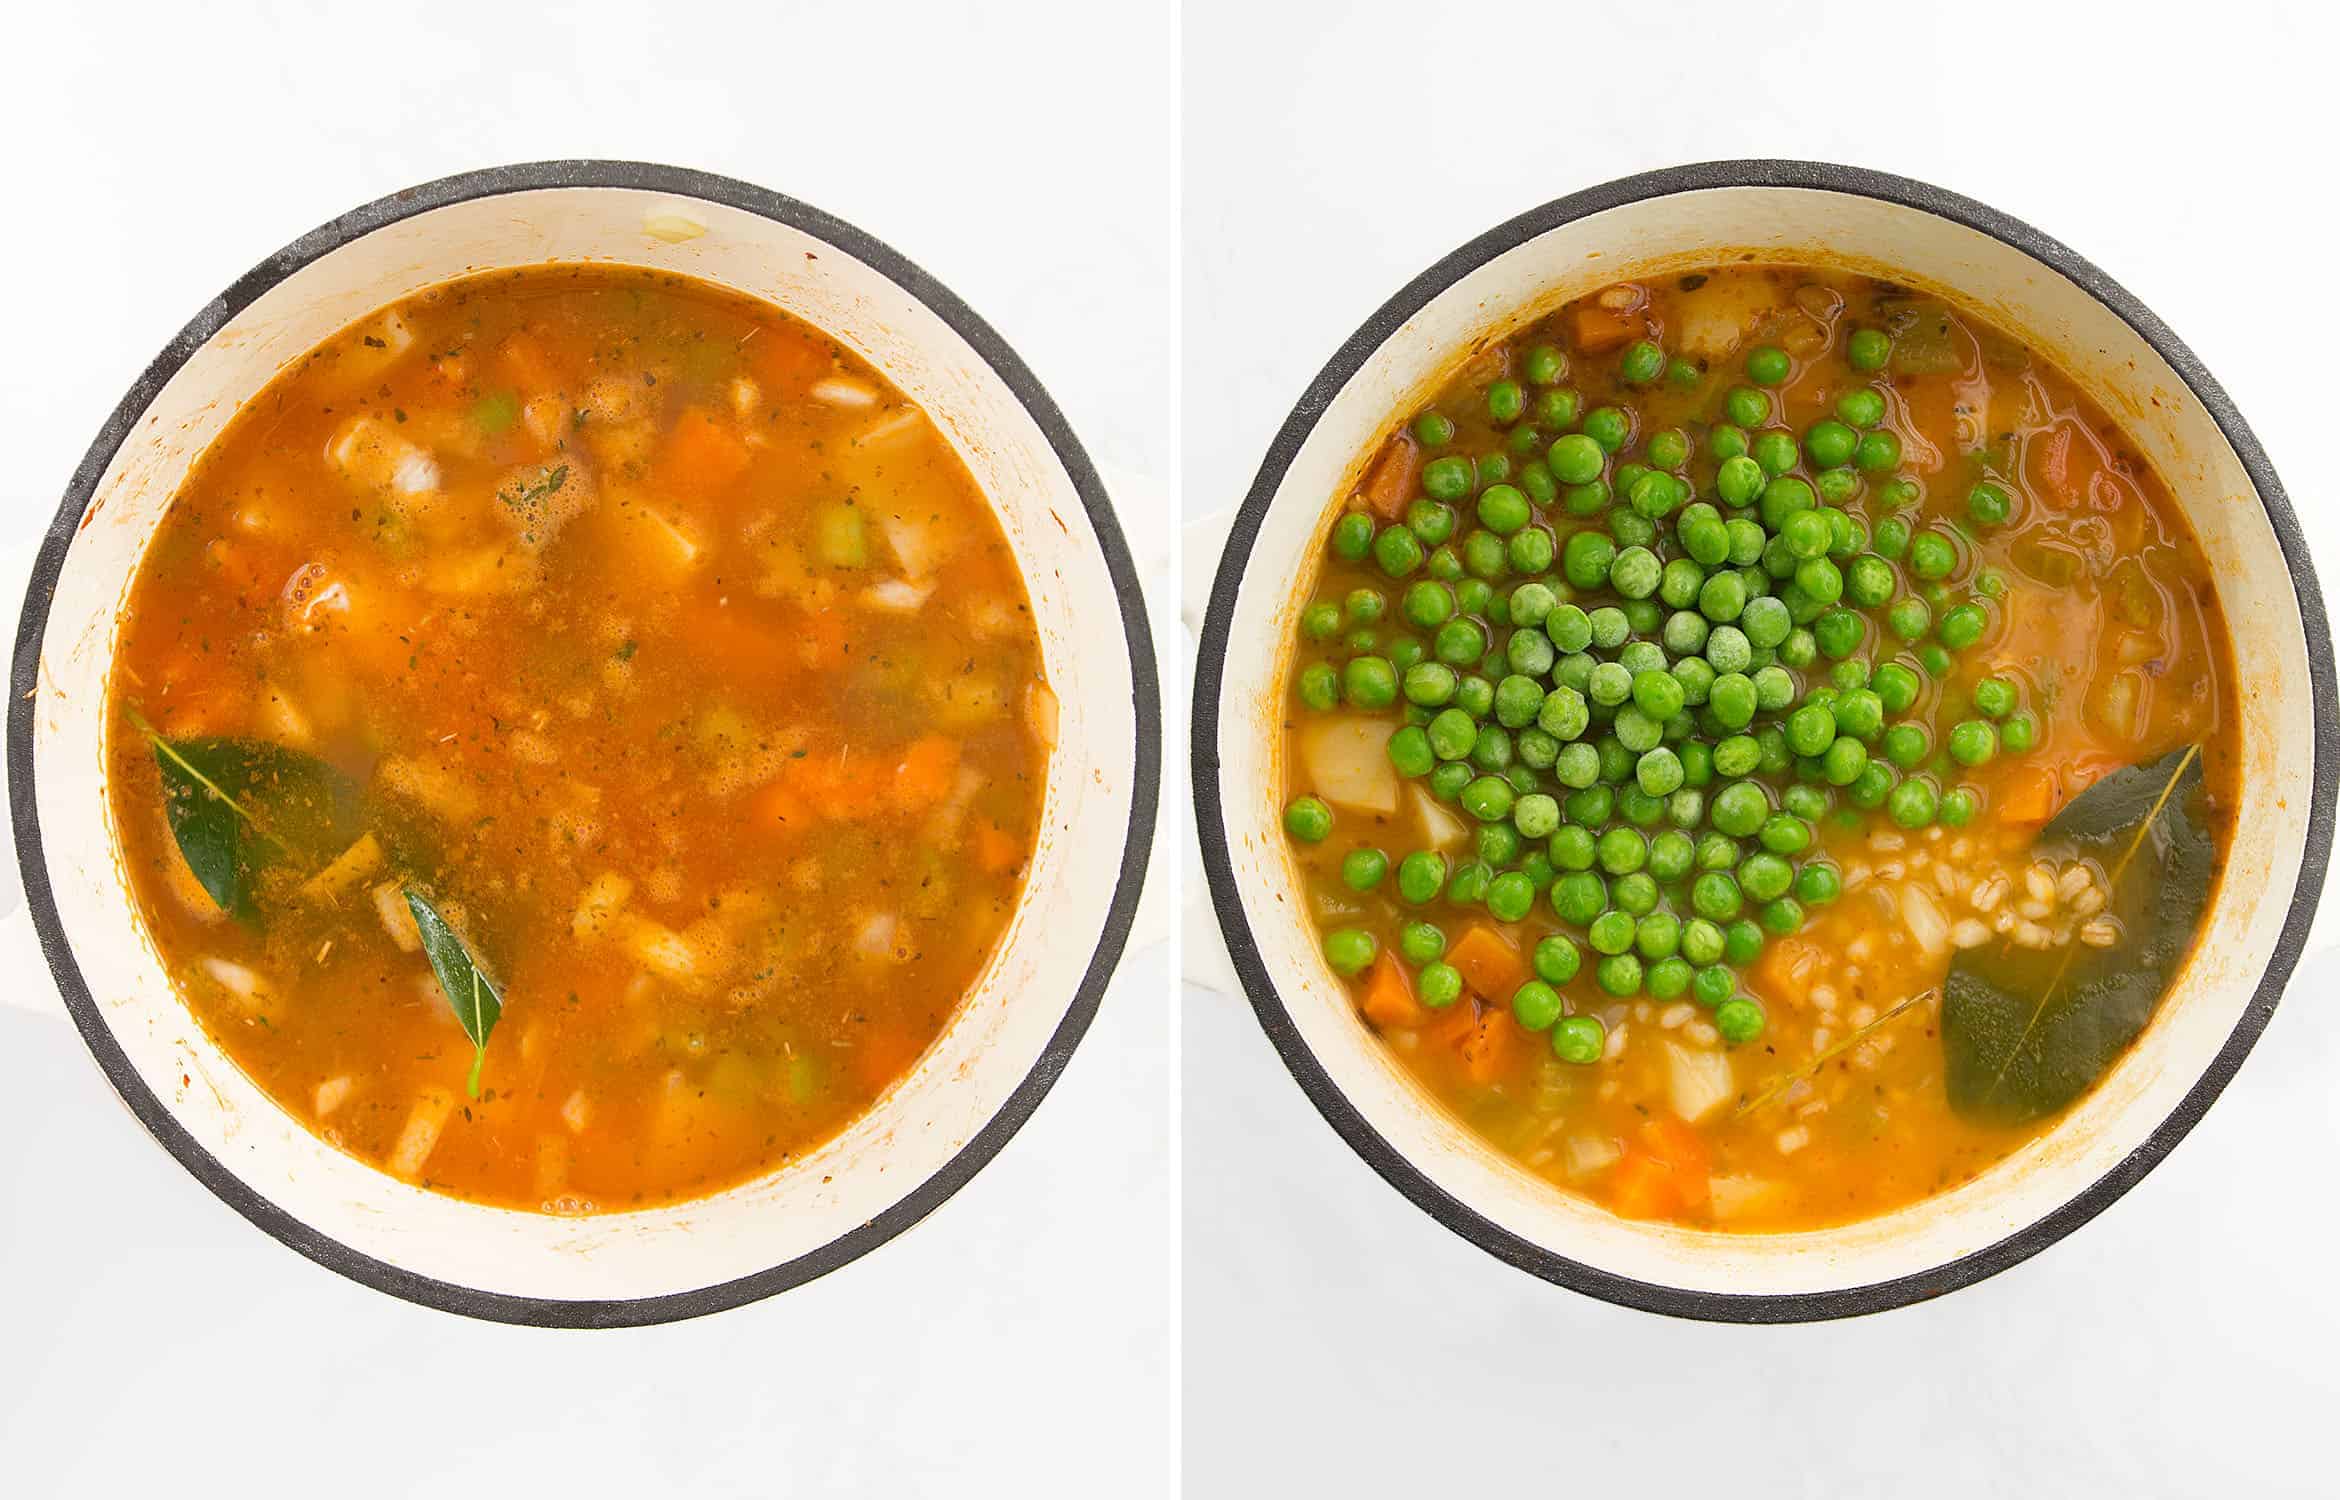 The first images shows the barley soup with broth. The second images shows the addition of peas.